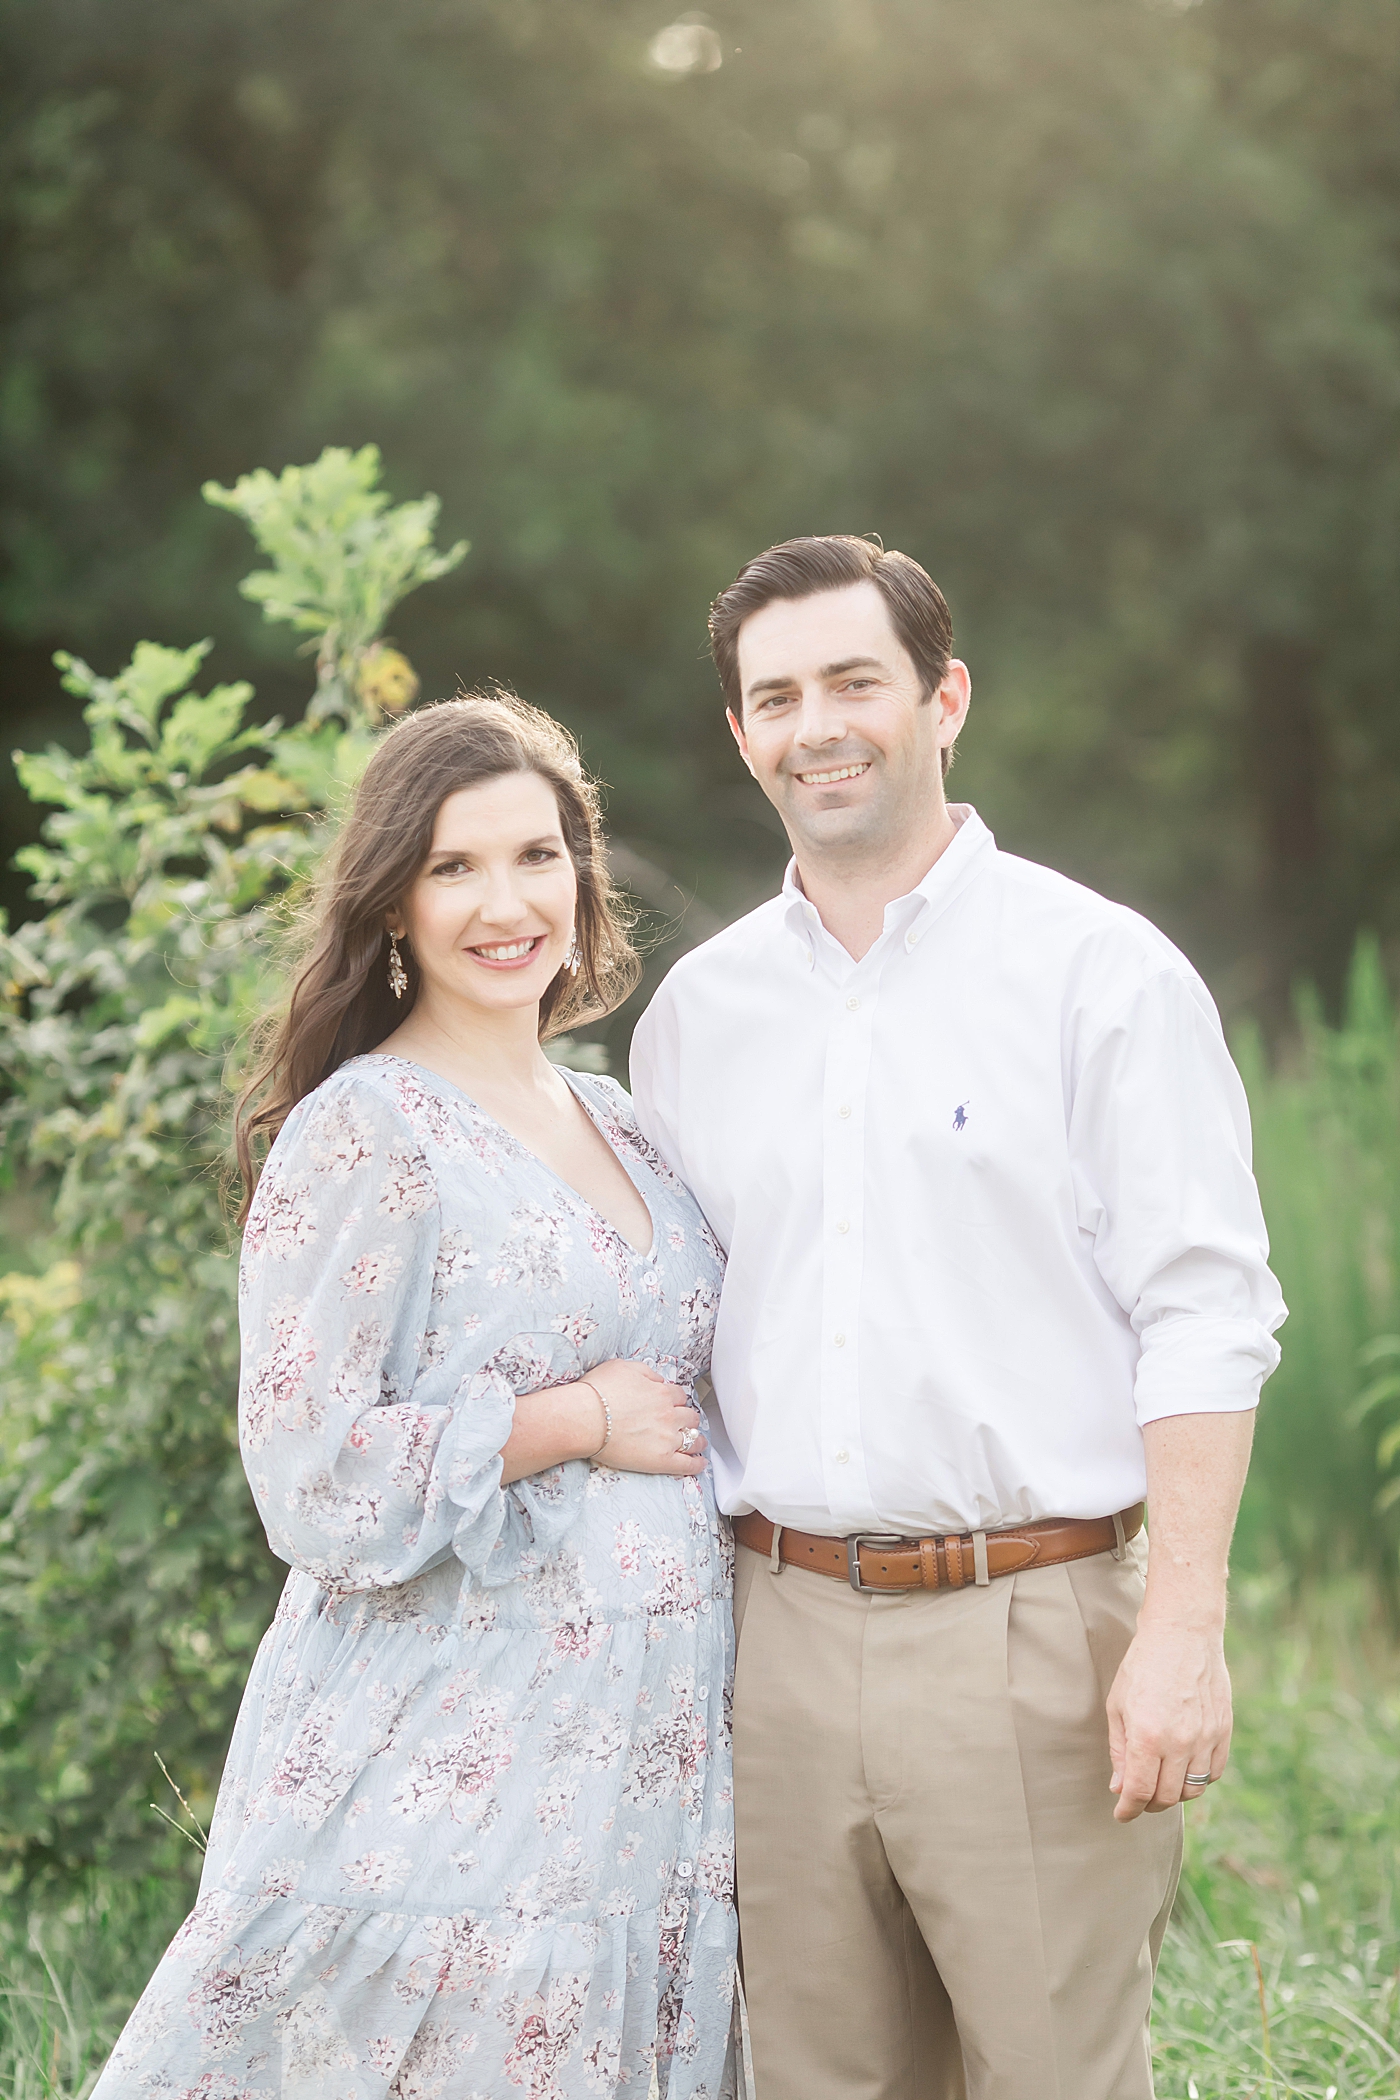 Outdoor maternity session with first-time parents. Photo by Fresh Light Photography.